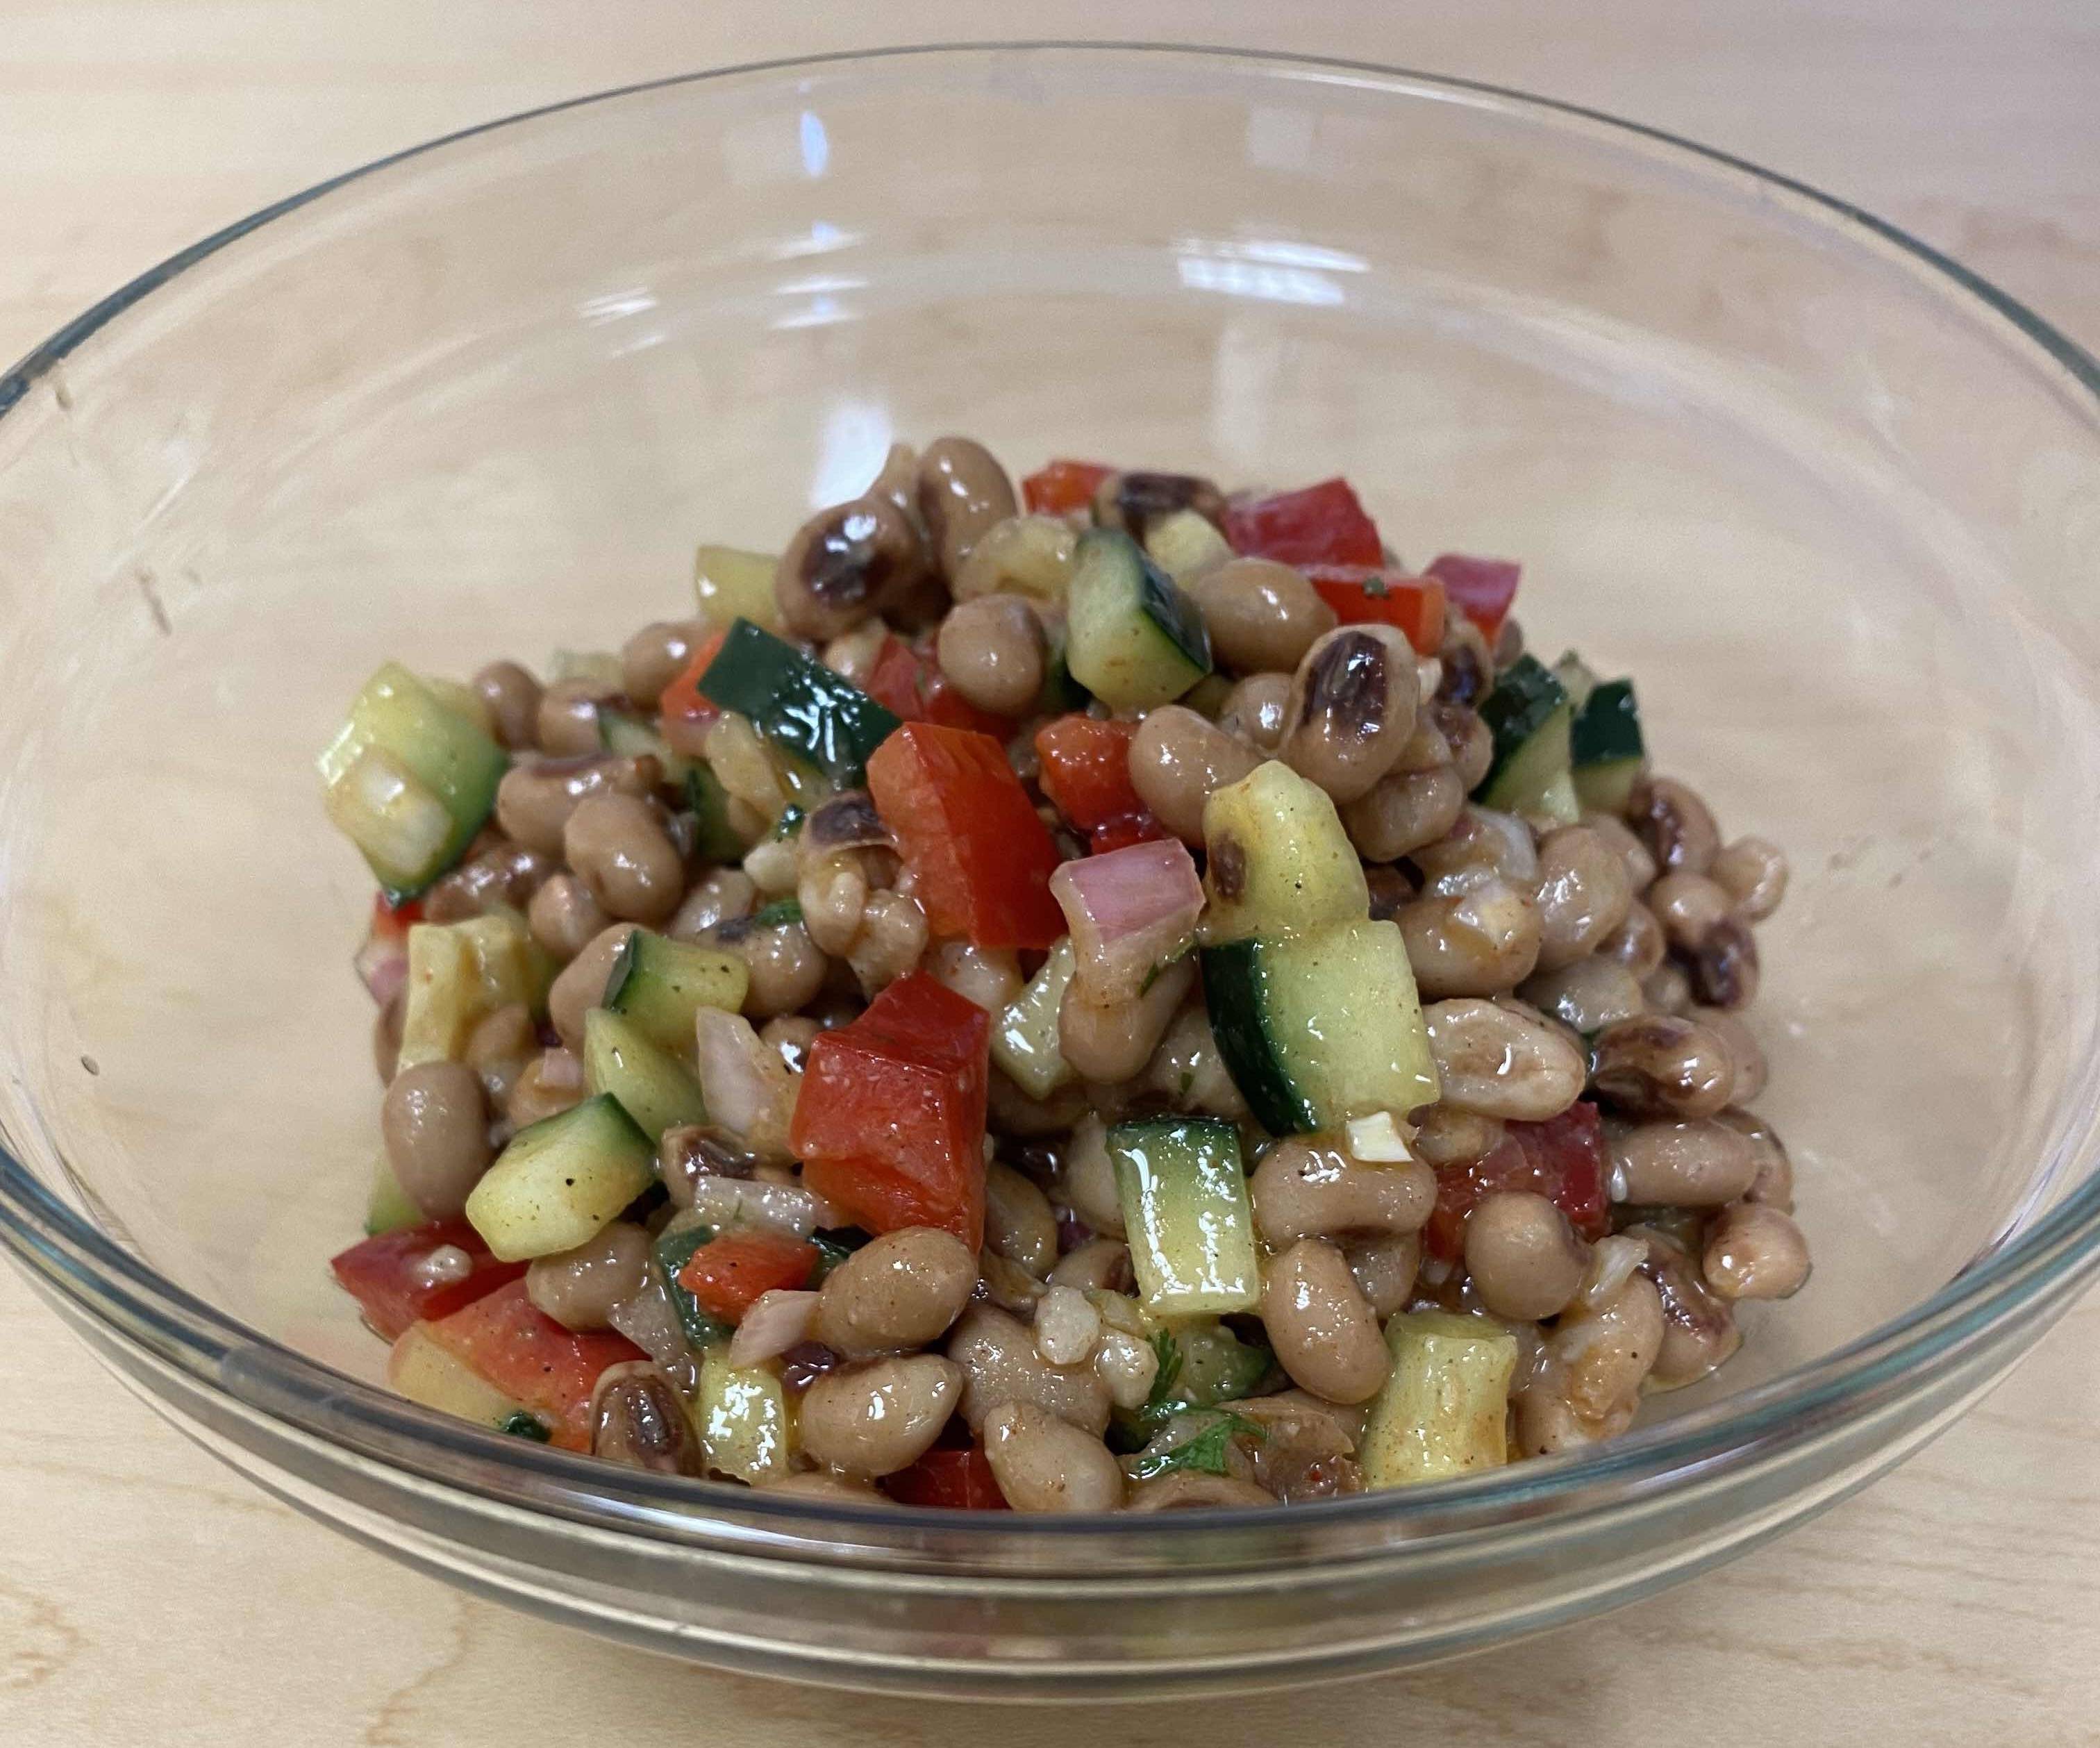 Black-eyed pea salad with tomato and red bell pepper in a clear bowl